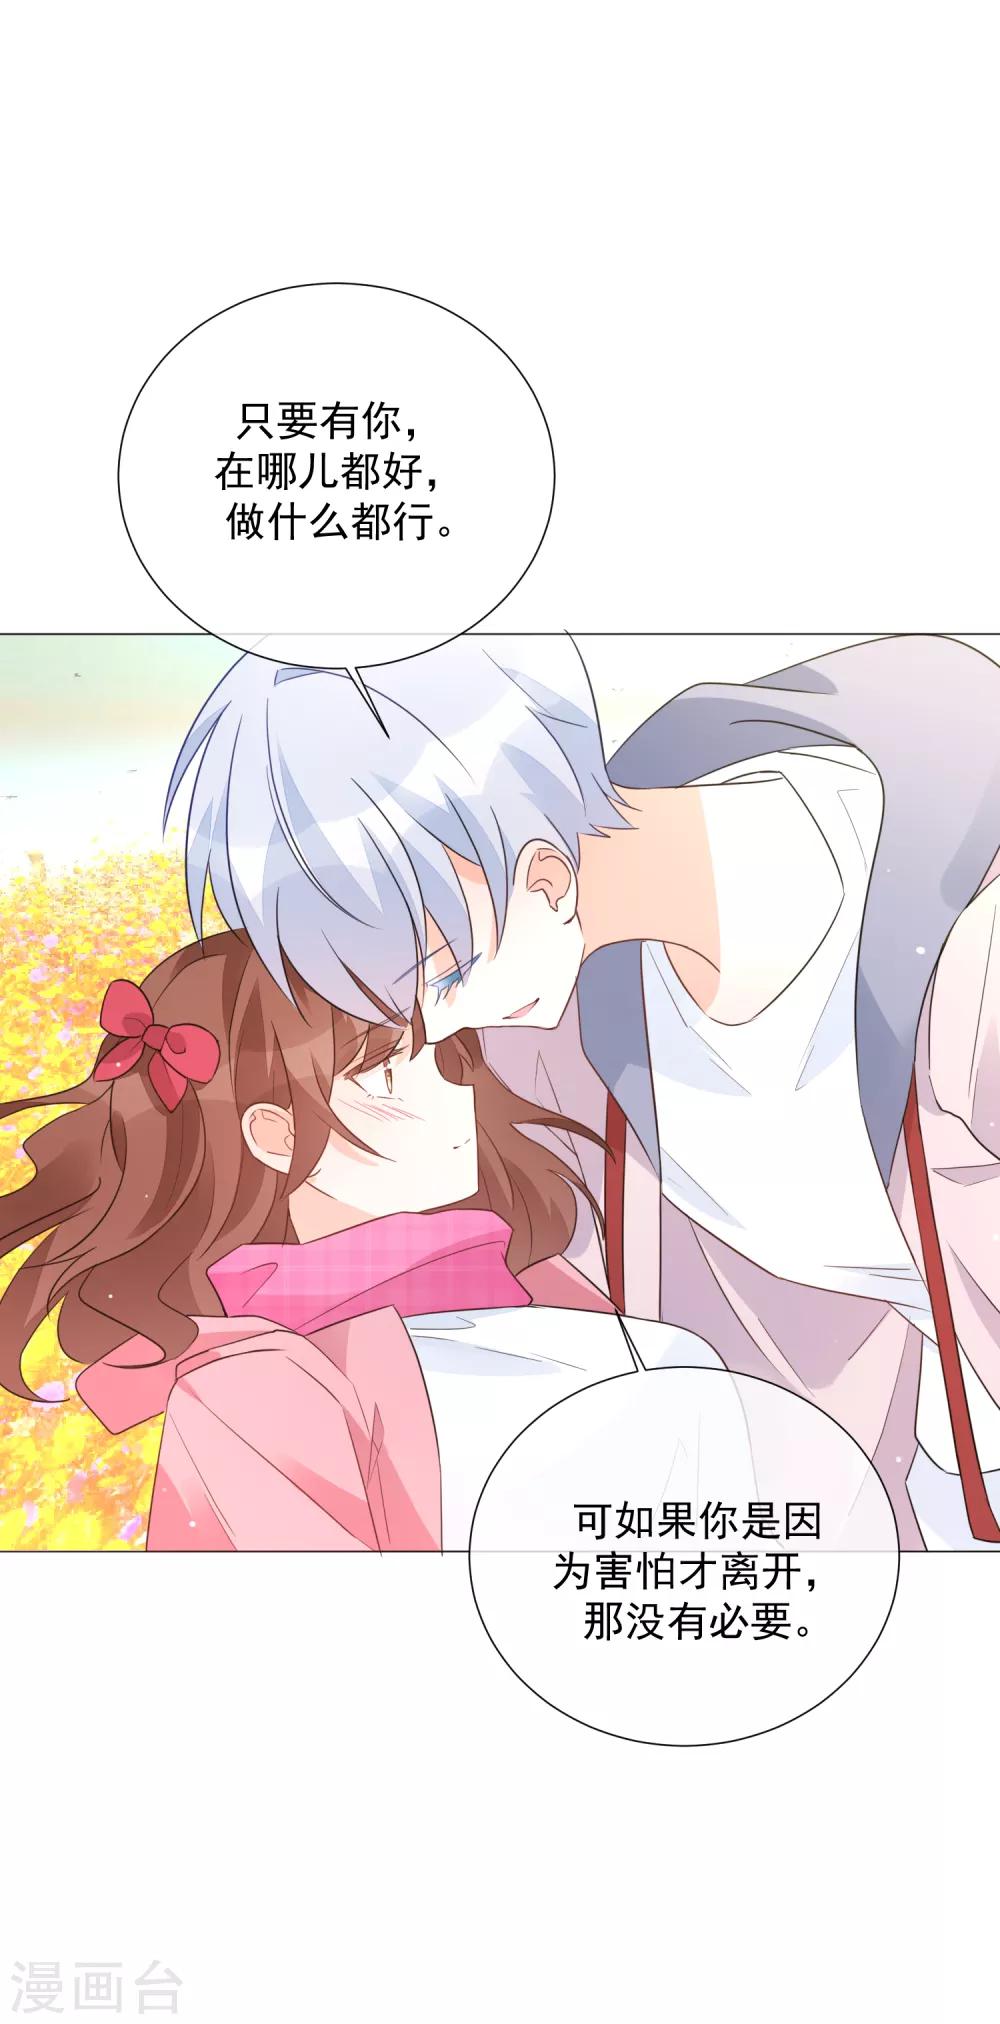 One Kiss A Day - 第87話 不好的預感 - 2